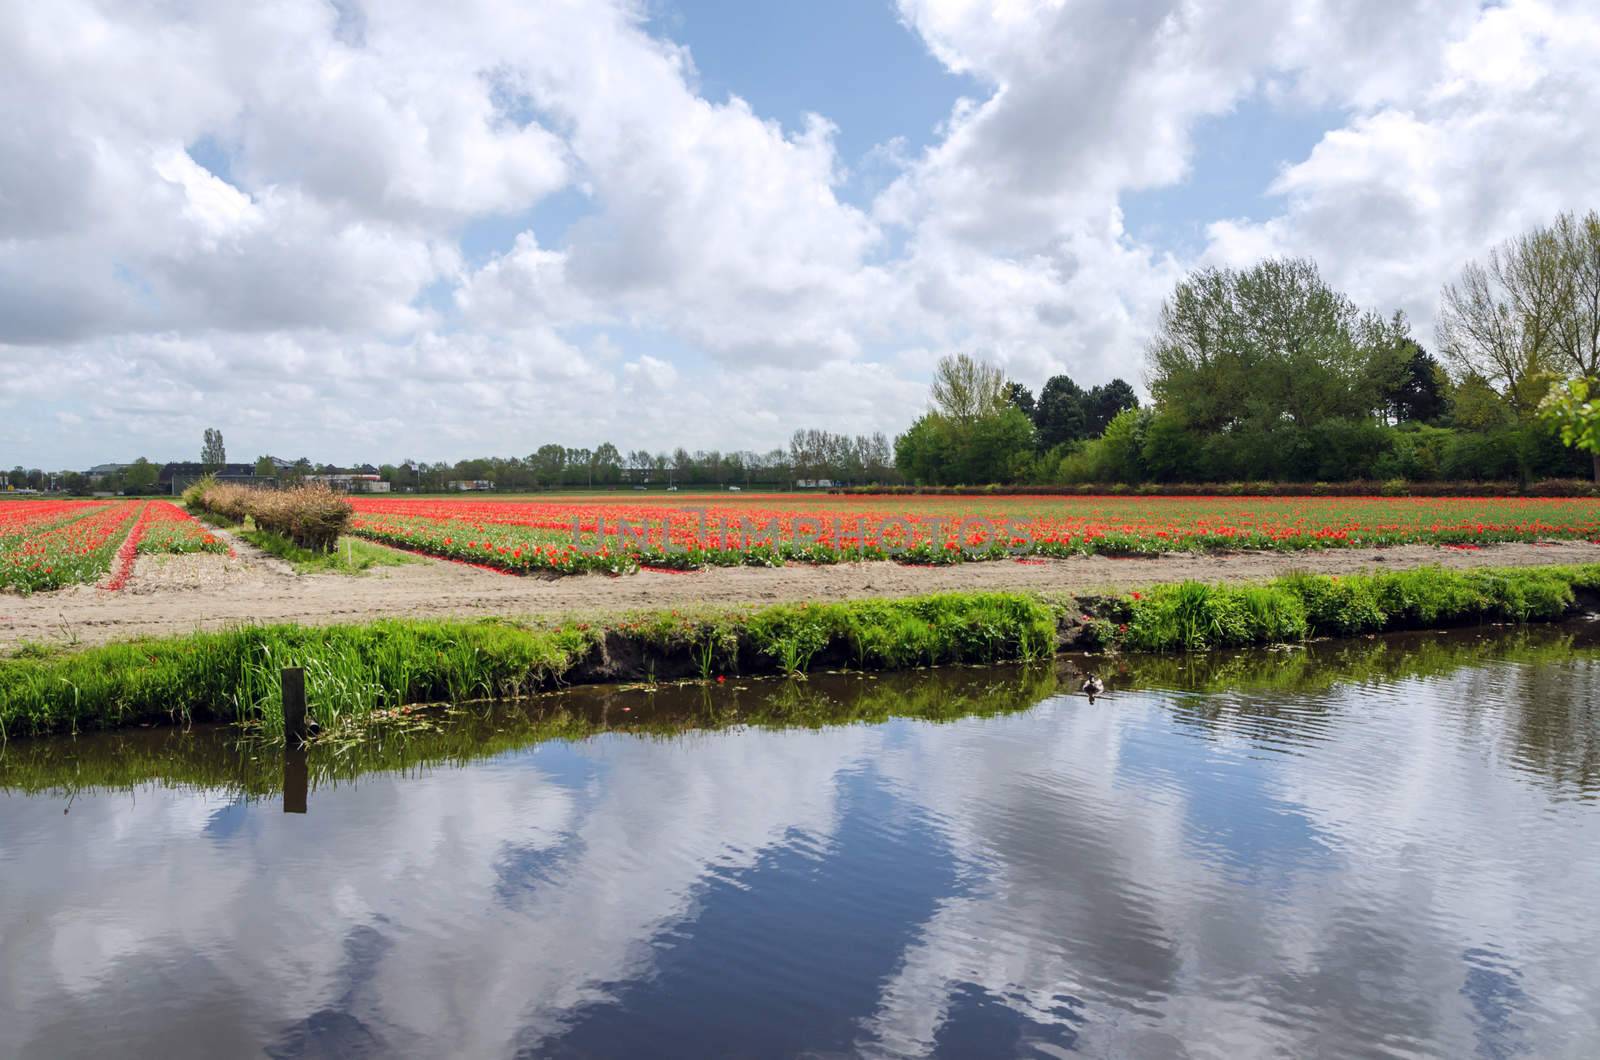 Dutch bulb field near the river in Lisse, The Netherlands